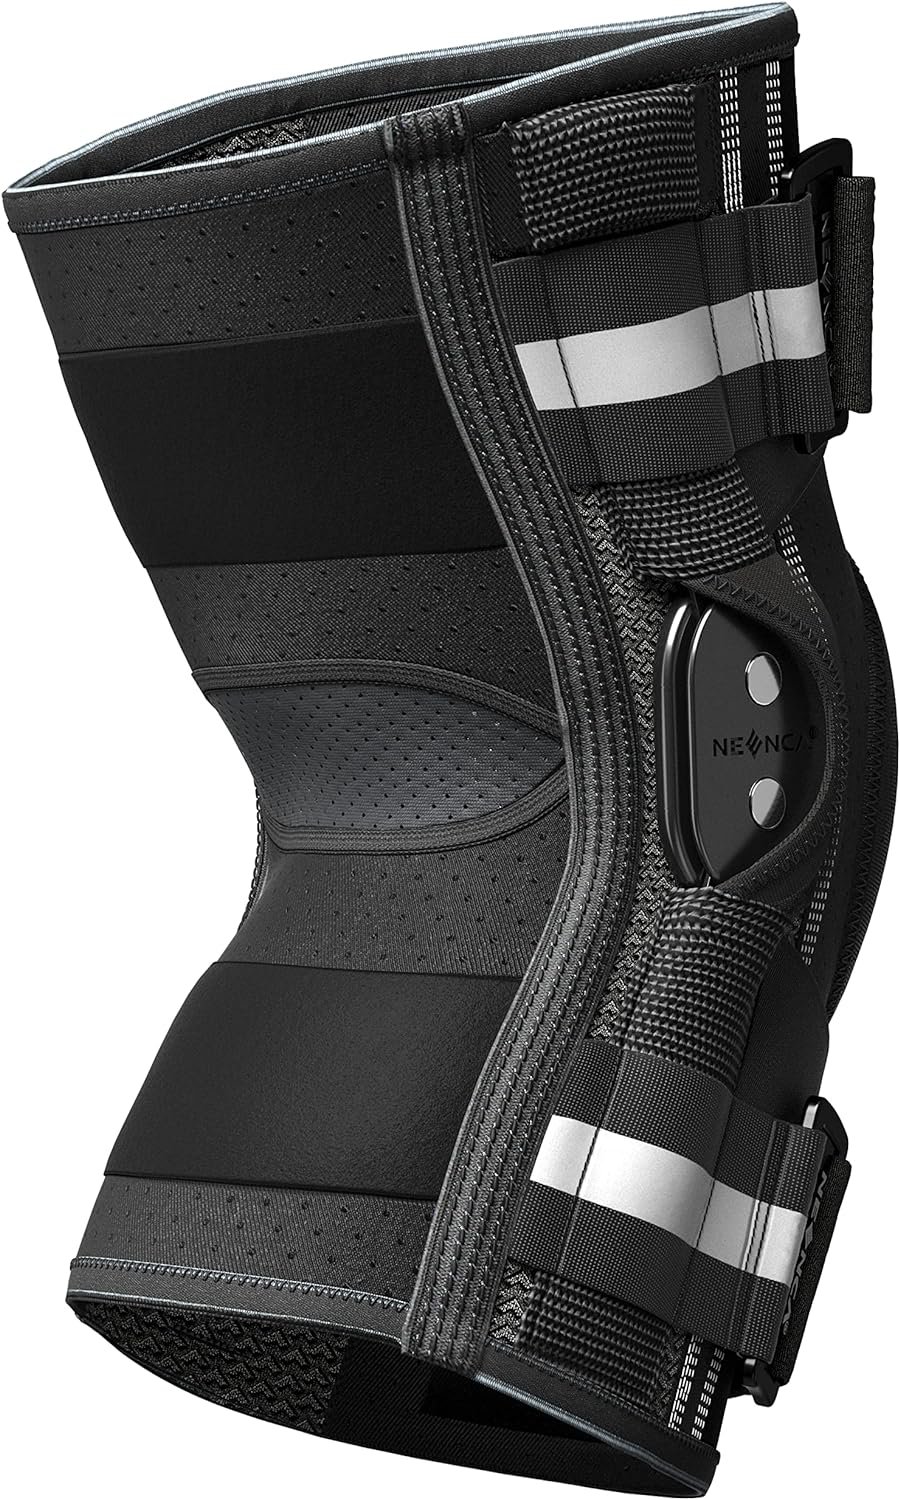 NEENCA Professional Knee Brace for Knee Pain, Adjustable Hinged Knee Support with Patented X-Strap Fixing System, Strong Stability for Jonit Pain Relief, Arthritis,Meniscus Tear,ACL,PCL,Runner, Sports